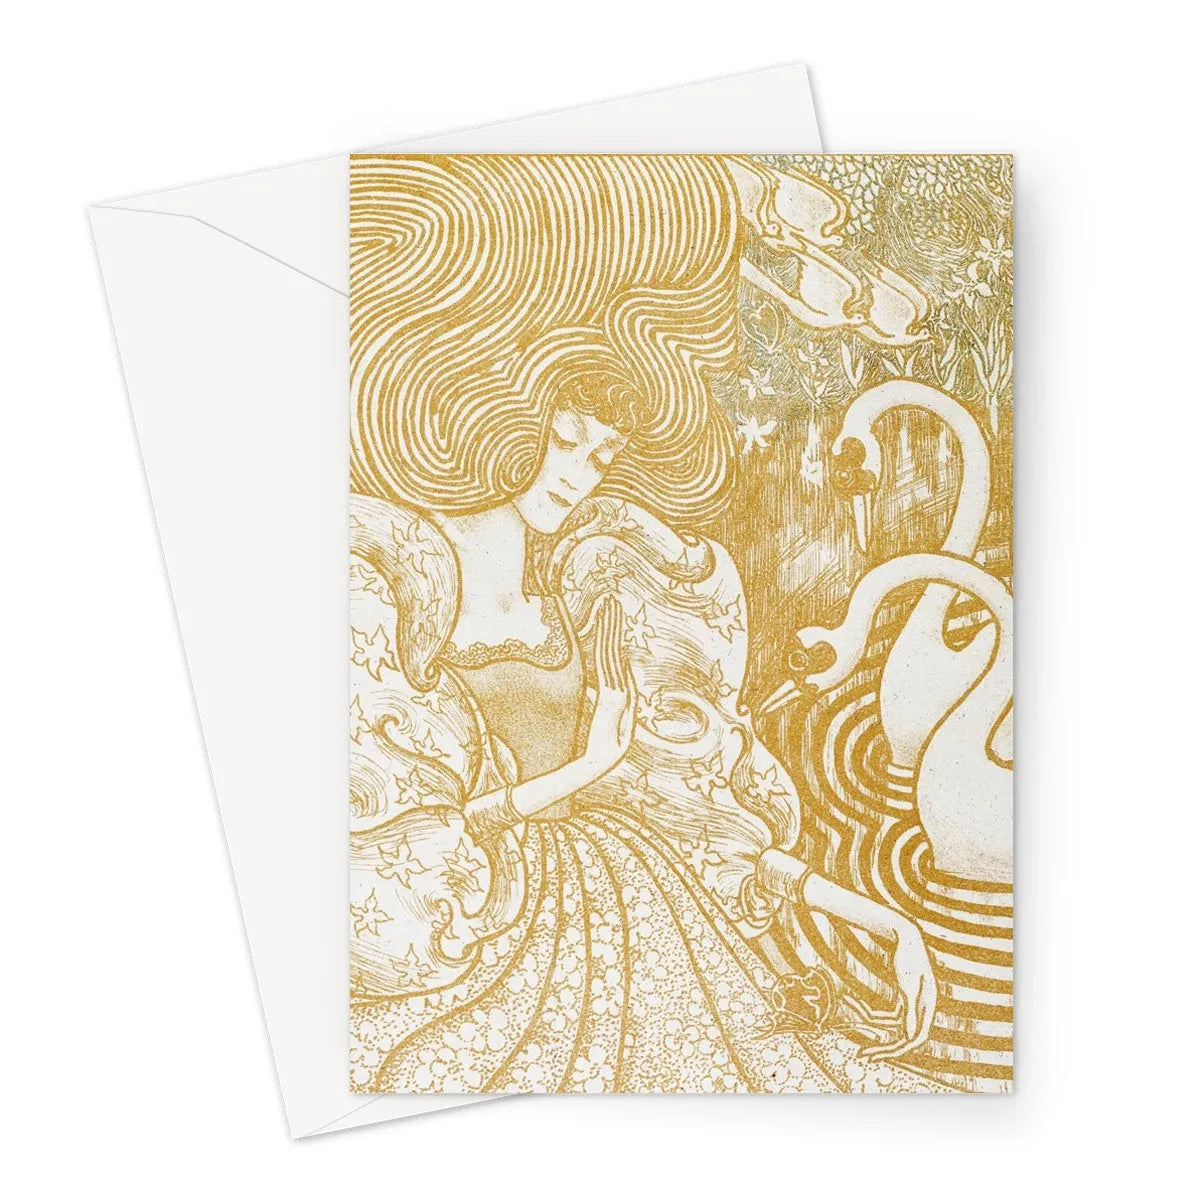 Woman With a Butterfly At a Pond With Two Swans By Jan Toorop Greeting Card - A5 Portrait / 1 Card - Notebooks &